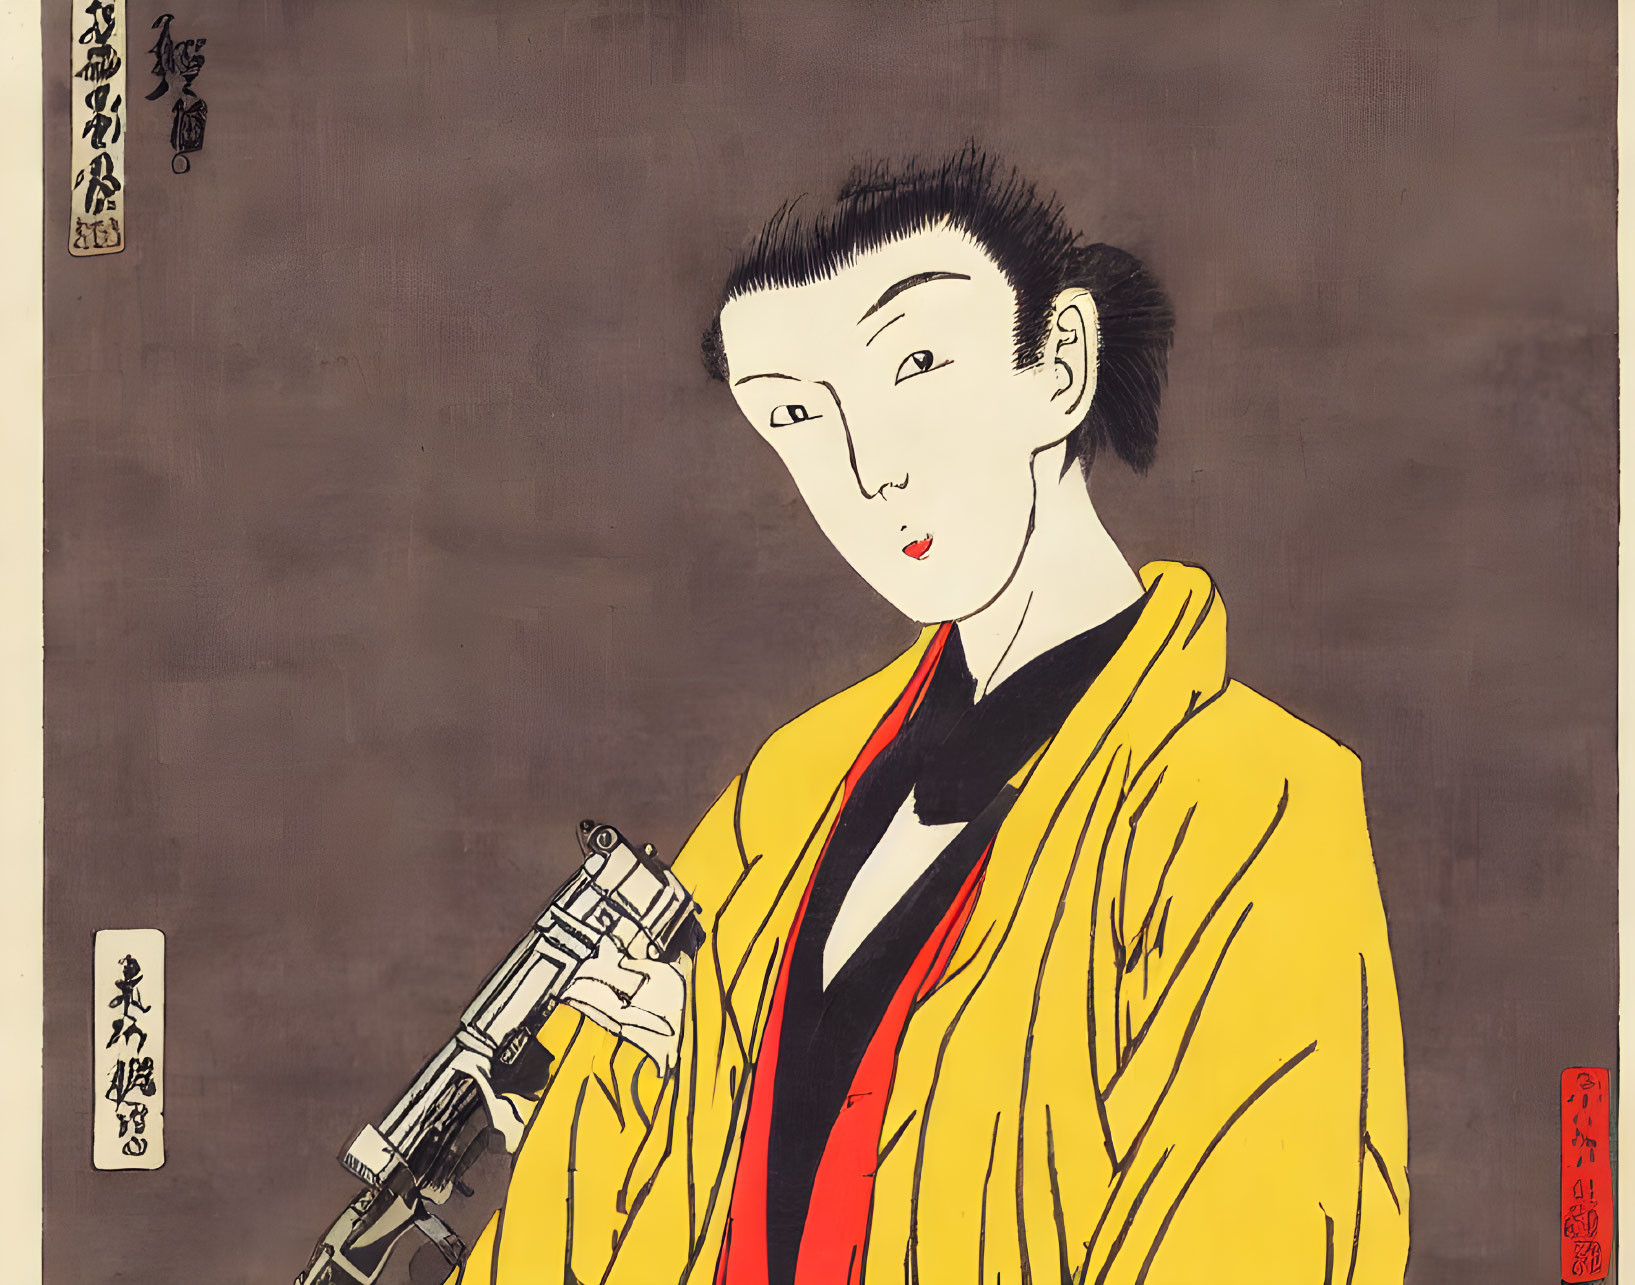 Traditional Japanese Woodblock Print: Woman in Yellow Kimono with Shamisen